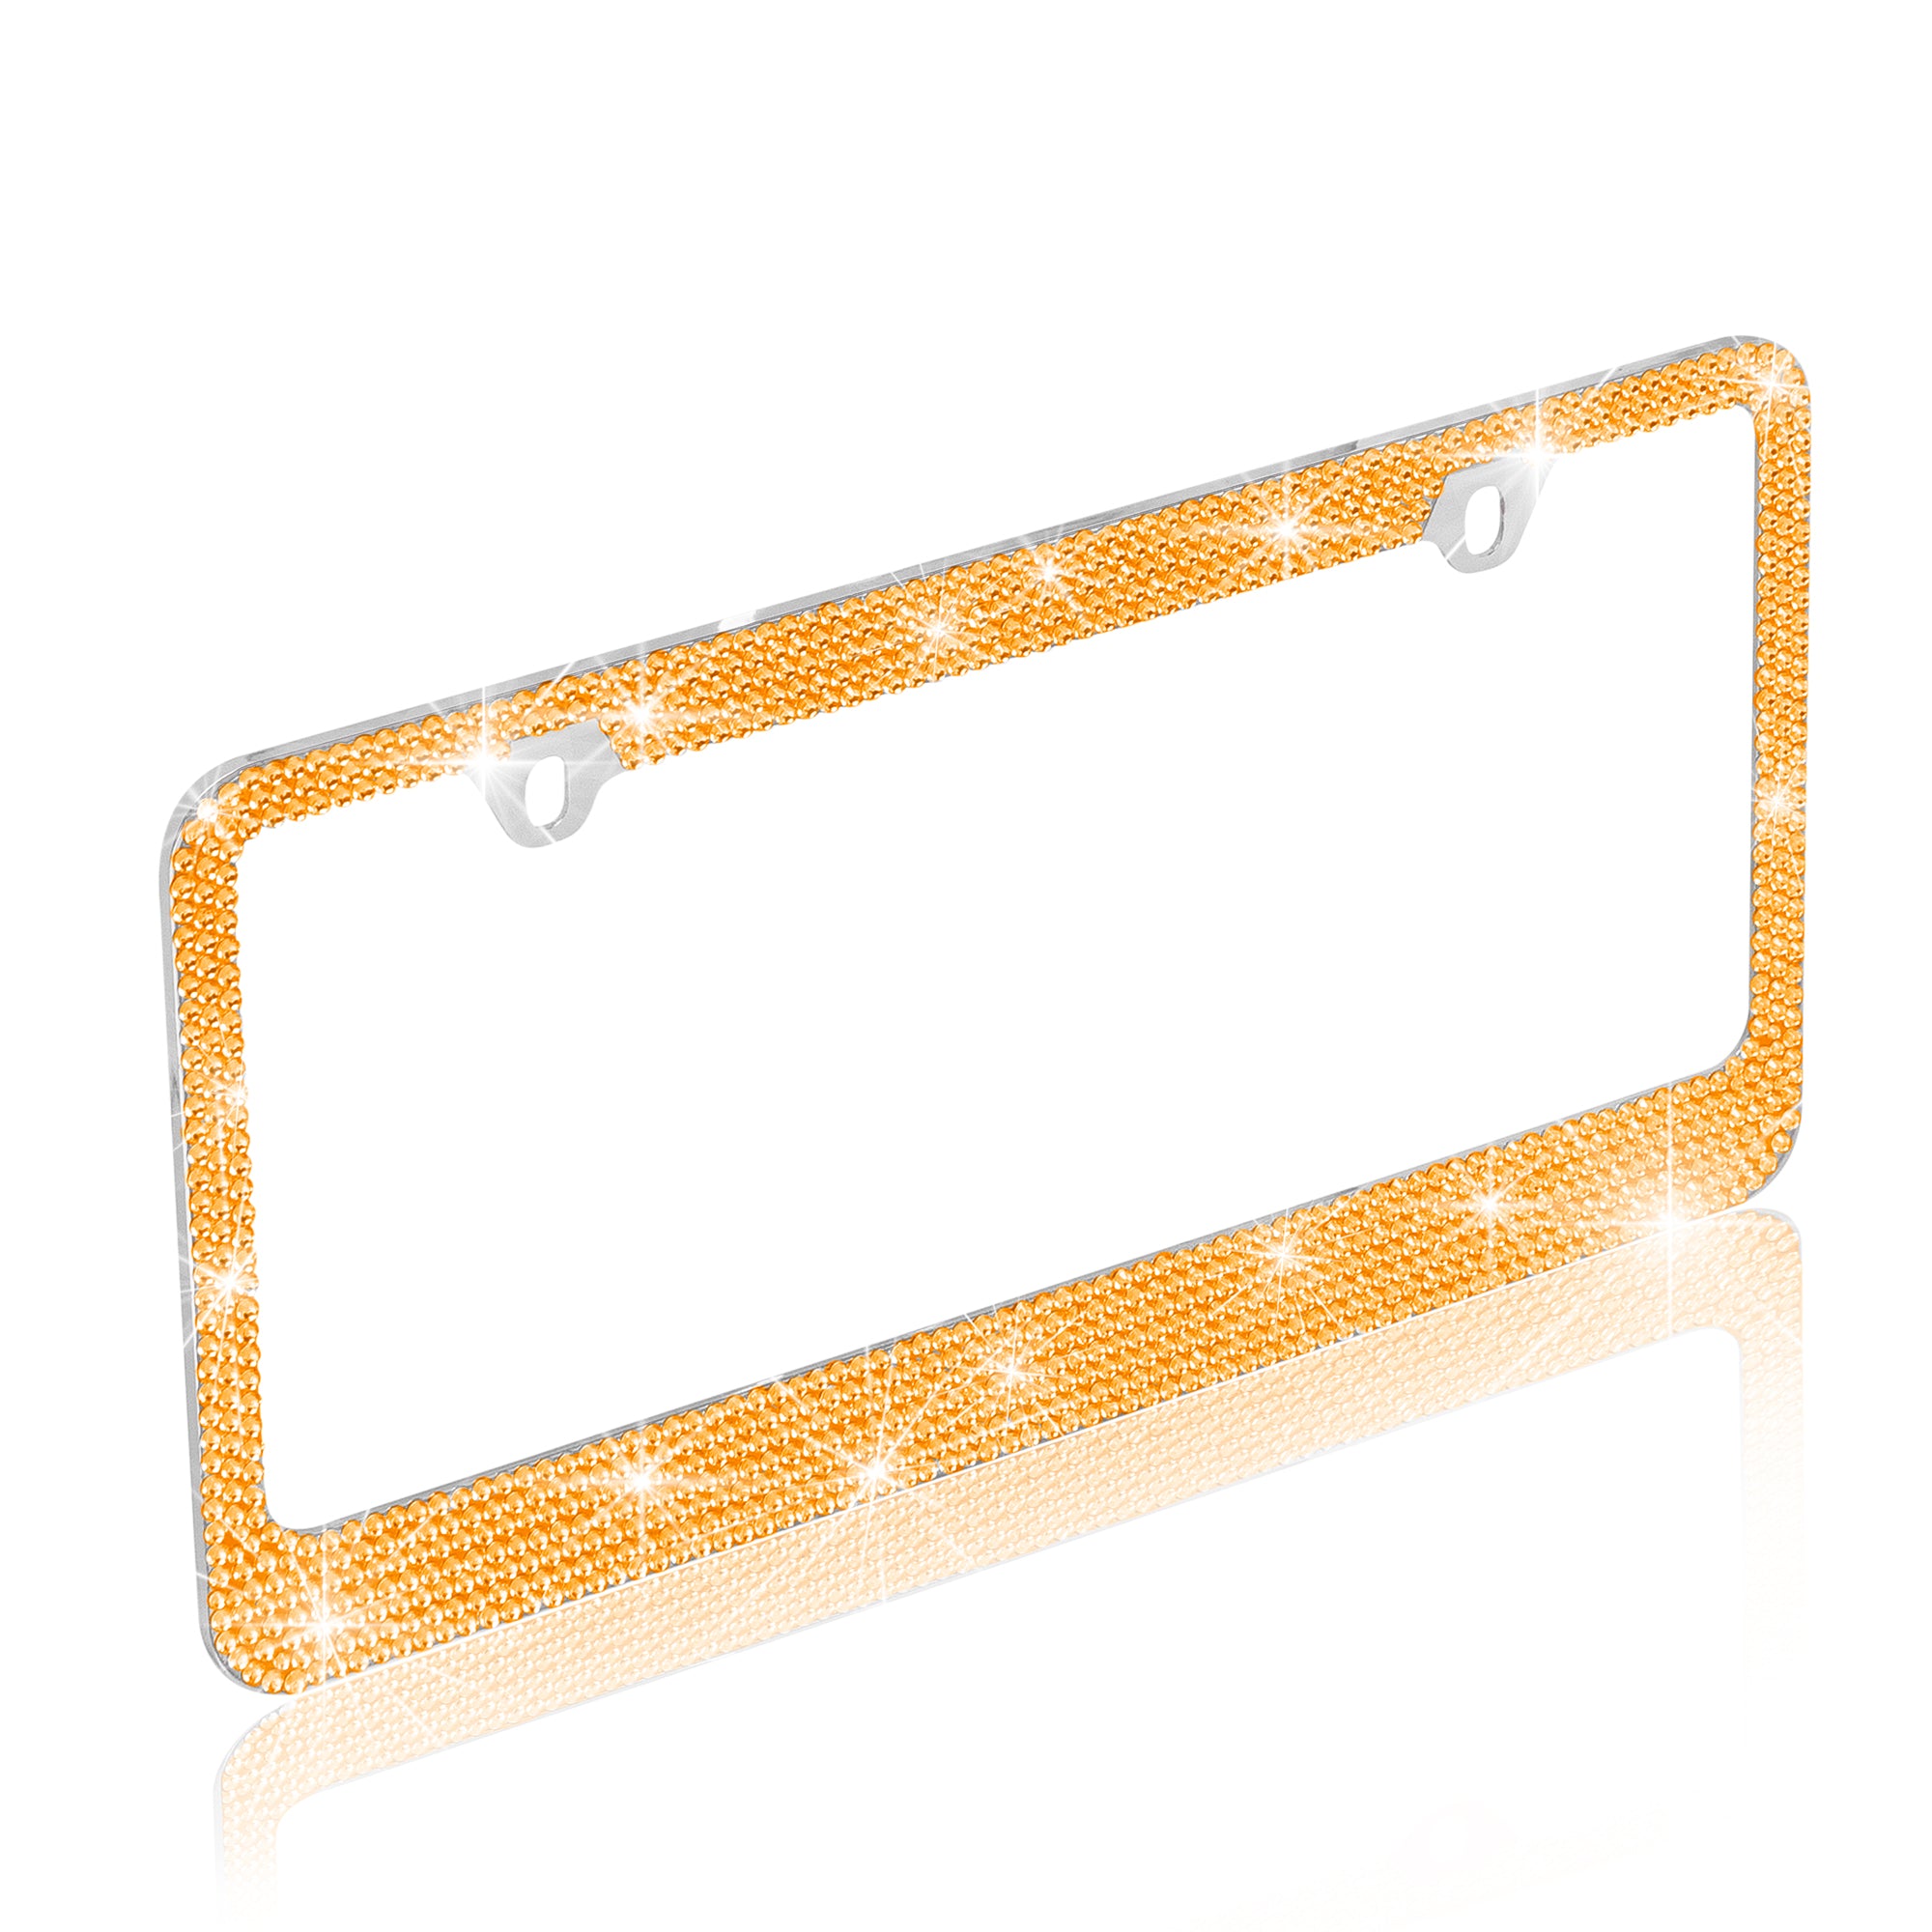 Stainless Steel Yellow Gold Sparkly Sparkling Diamond Crystal Bling Premium License Plate Frame Metal Silver Rhinestone for Women Universal Size for Car Truck SUV (Pack of 2)